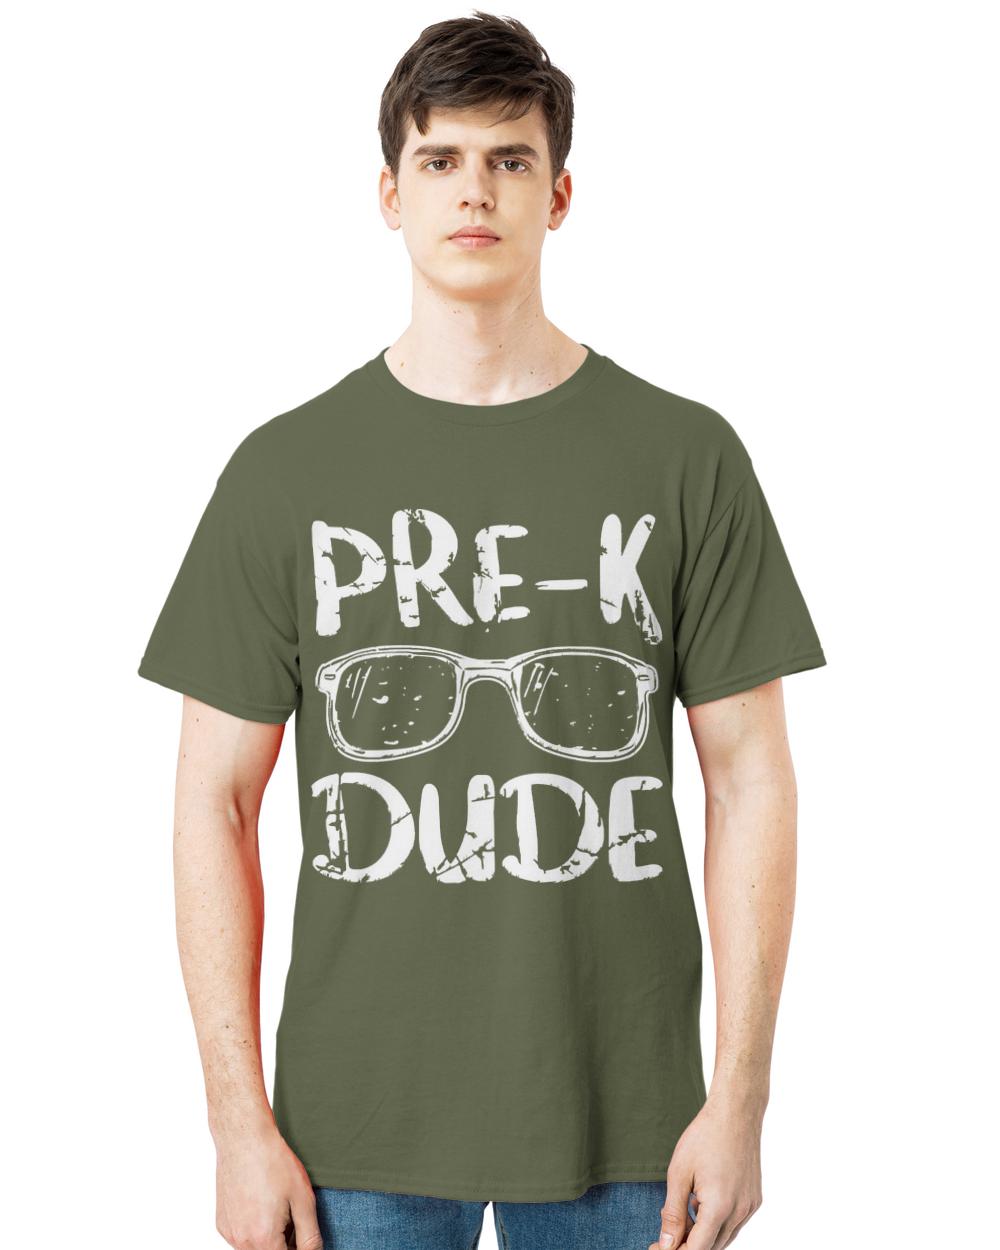 Pre K Dude T- Shirt Funny Kids Pre- K Dude First Day of School Funny Back to School Boys T- Shirt